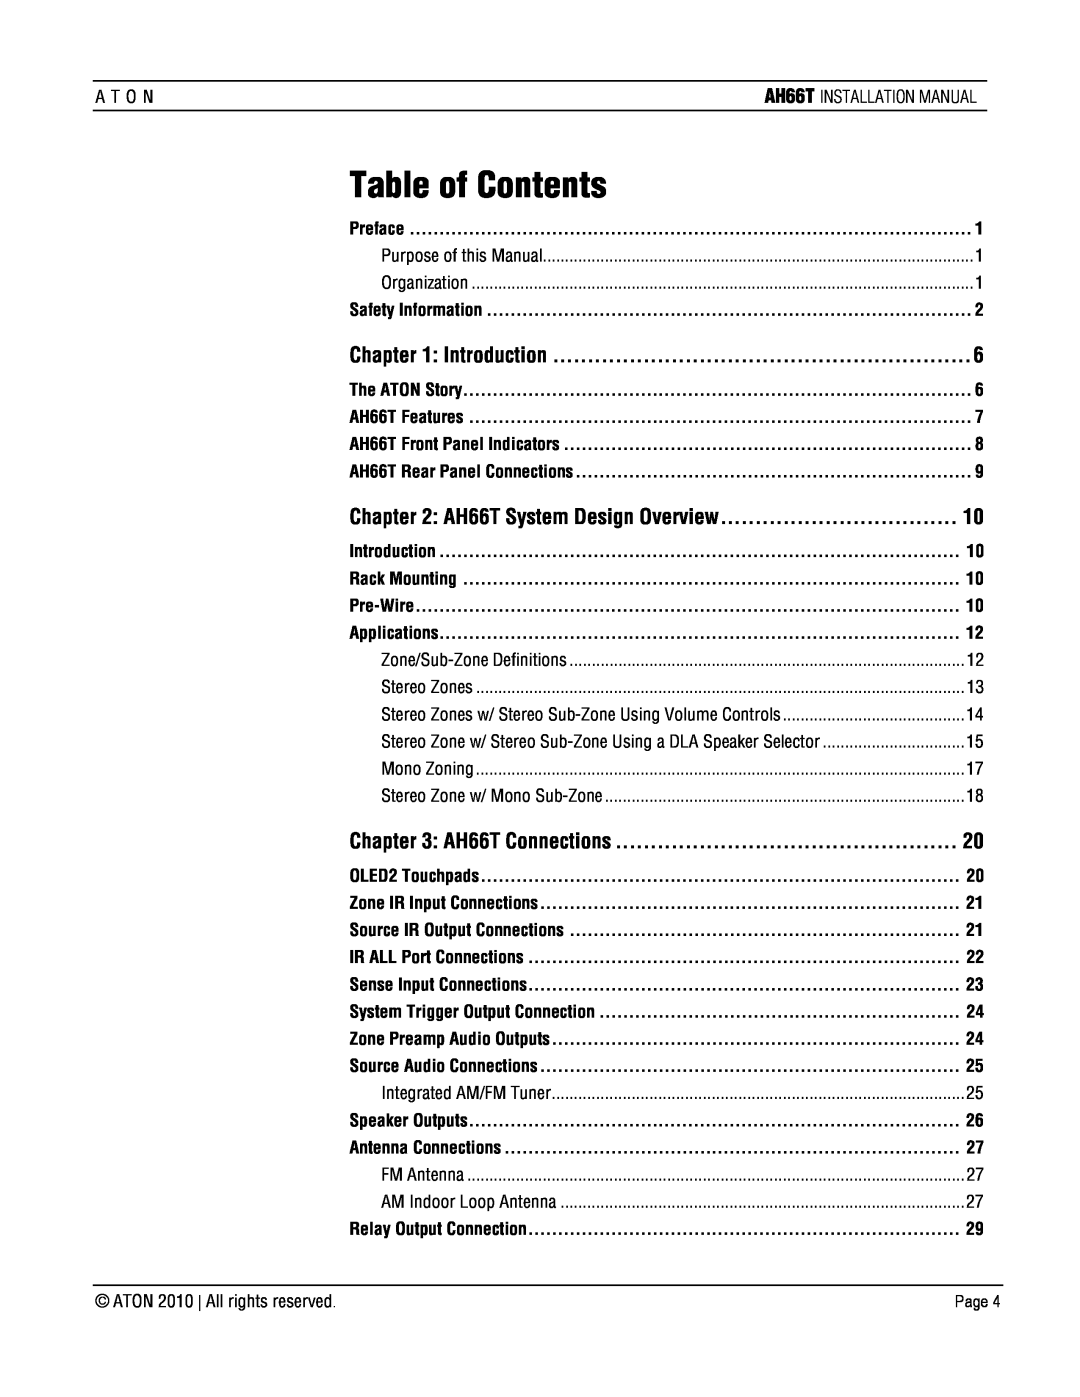 ATON AH66T-KT Table of Contents, AH66T System Design Overview, A T O N, Preface, Safety Information, The ATON Story, Page 